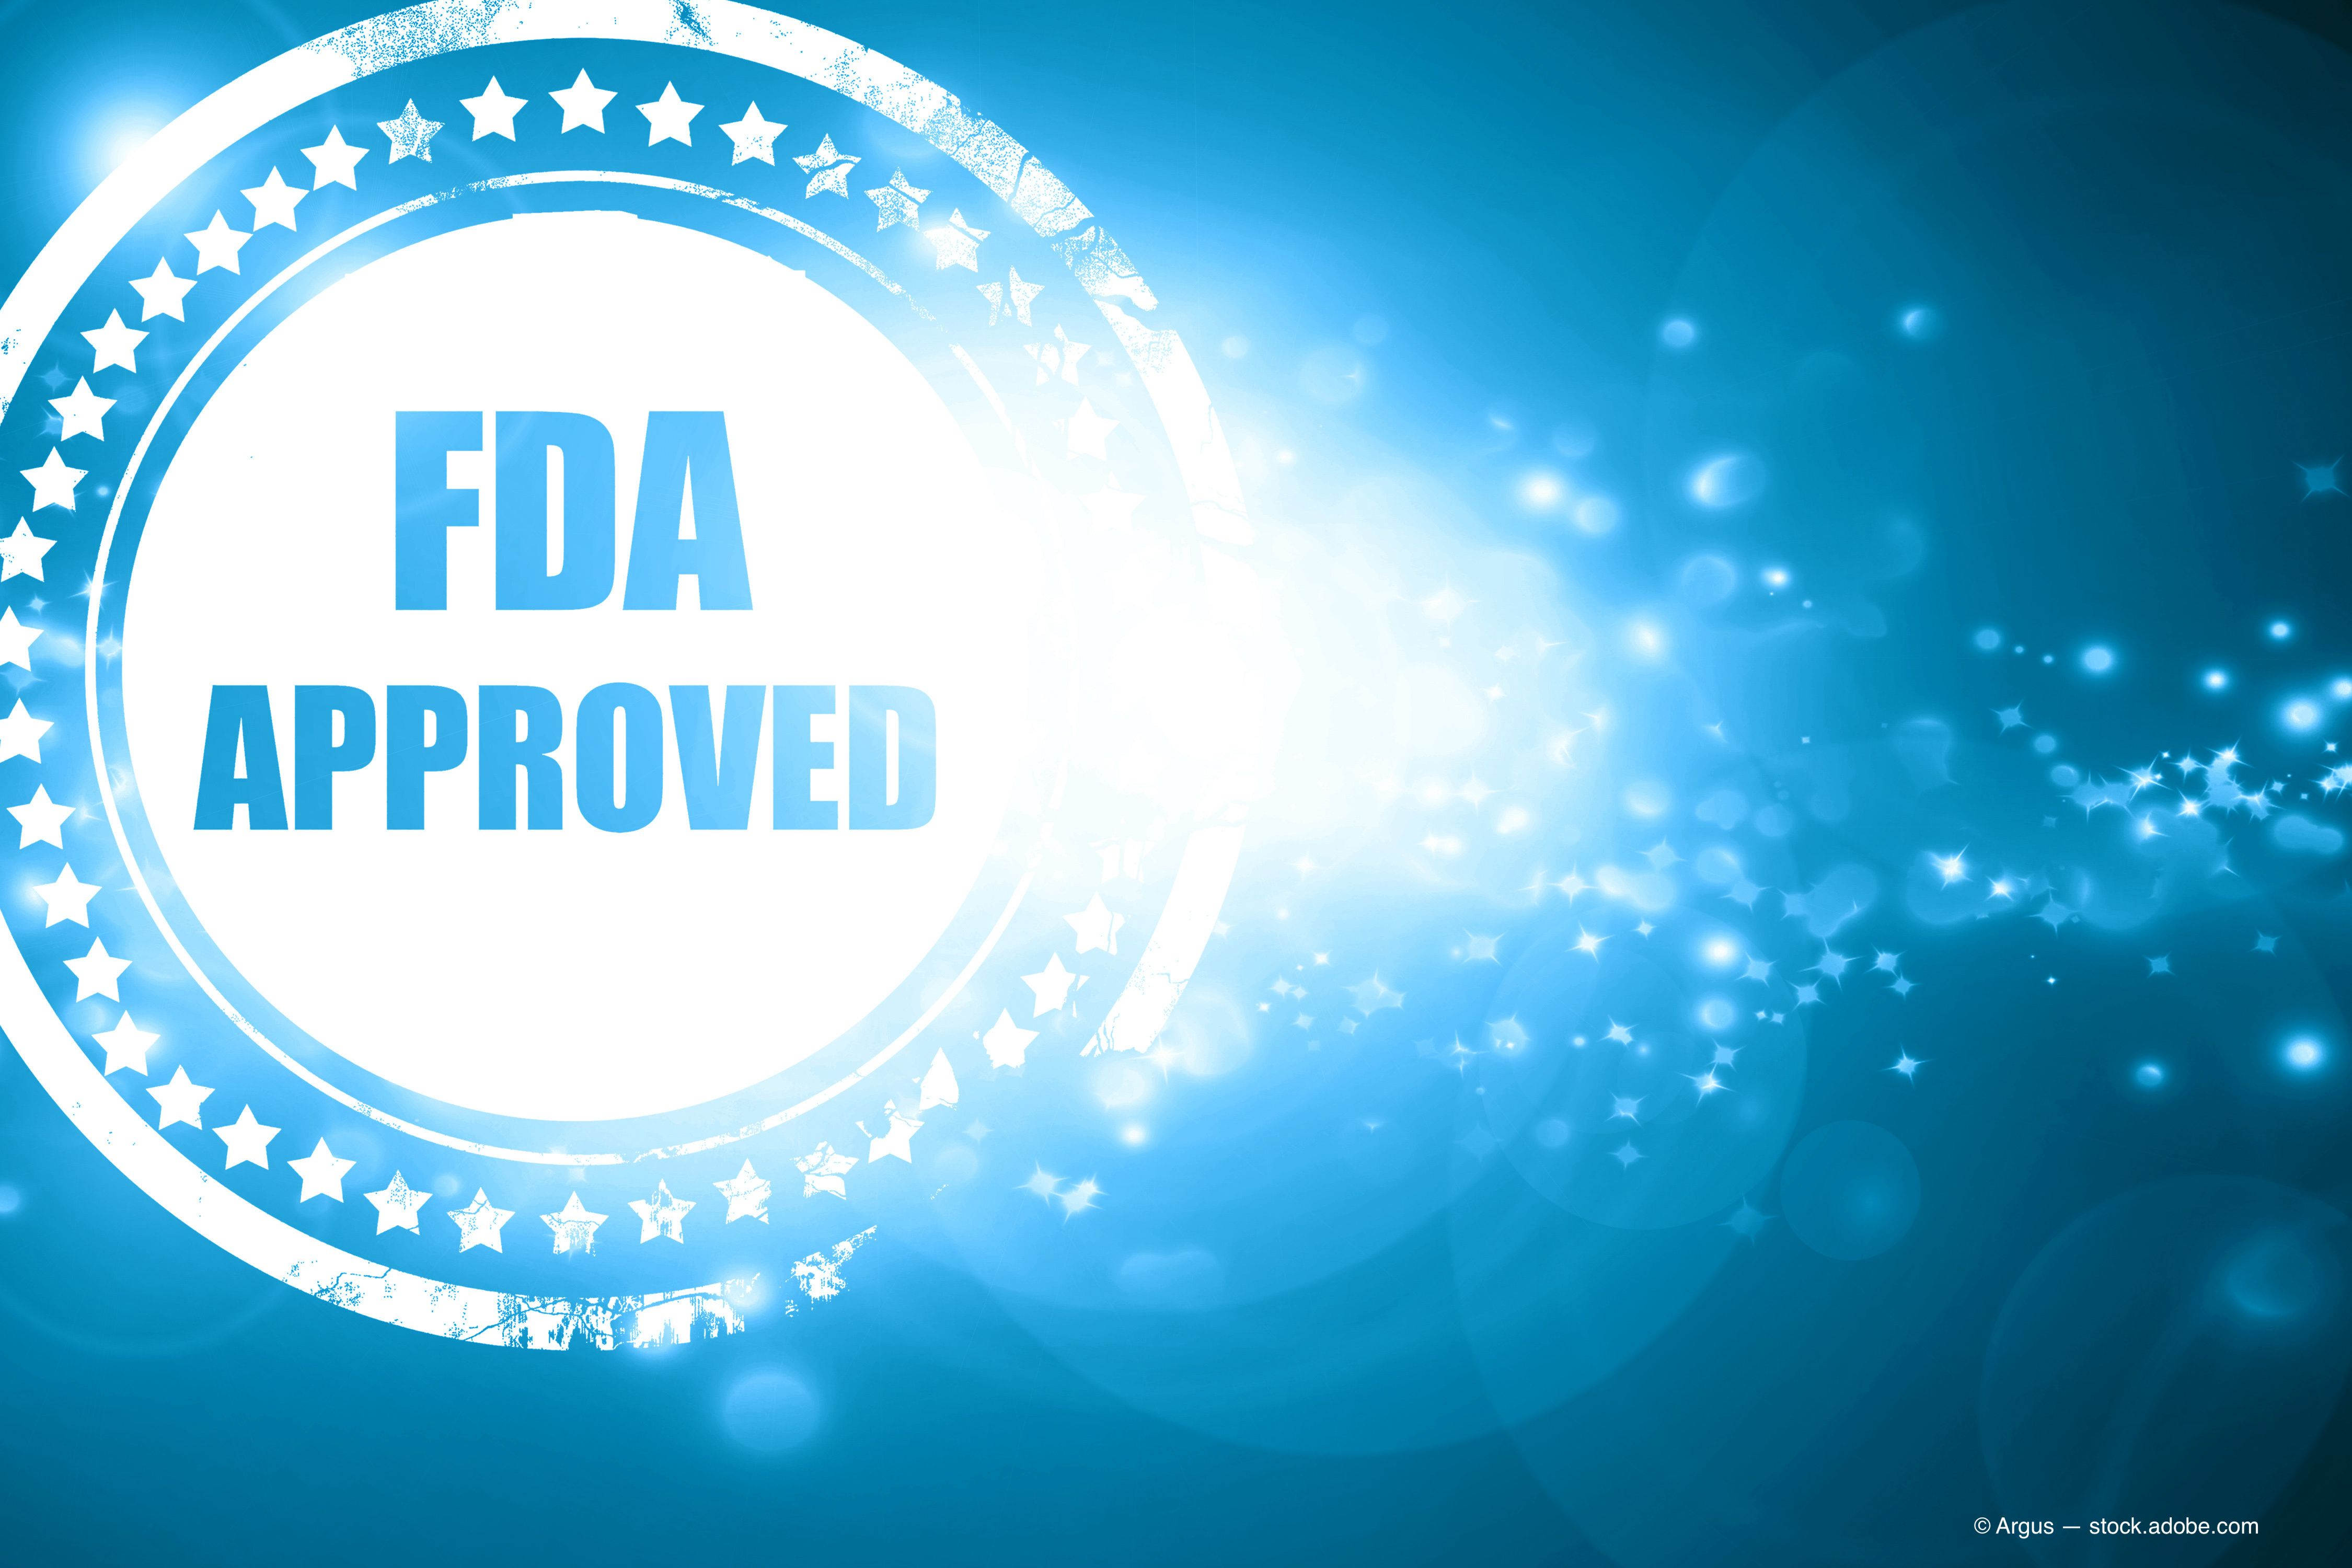 BREAKING: FDA approves faricimab to treat wet AMD, DME